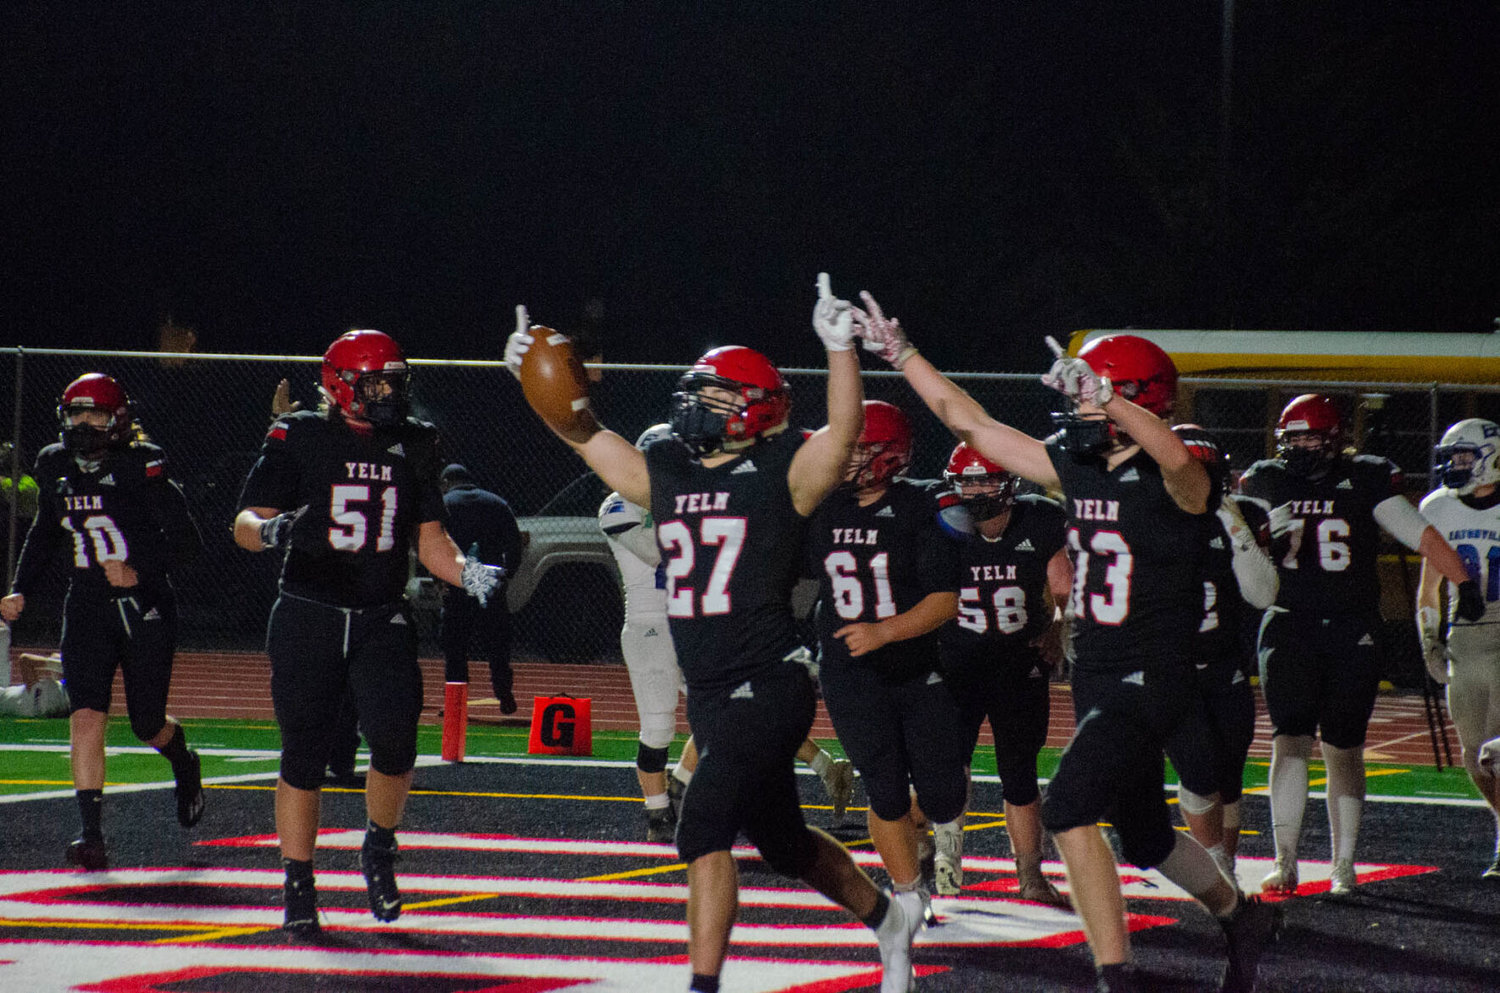 Senior running back Sean Rohwedder celebrates after making a fourth-quarter, 10-yard rush to bring Yelm the lead Wednesday night against Eatonville. Yelm extended its undefeated streak with a 29-19 win over the 1A team from across the river. 